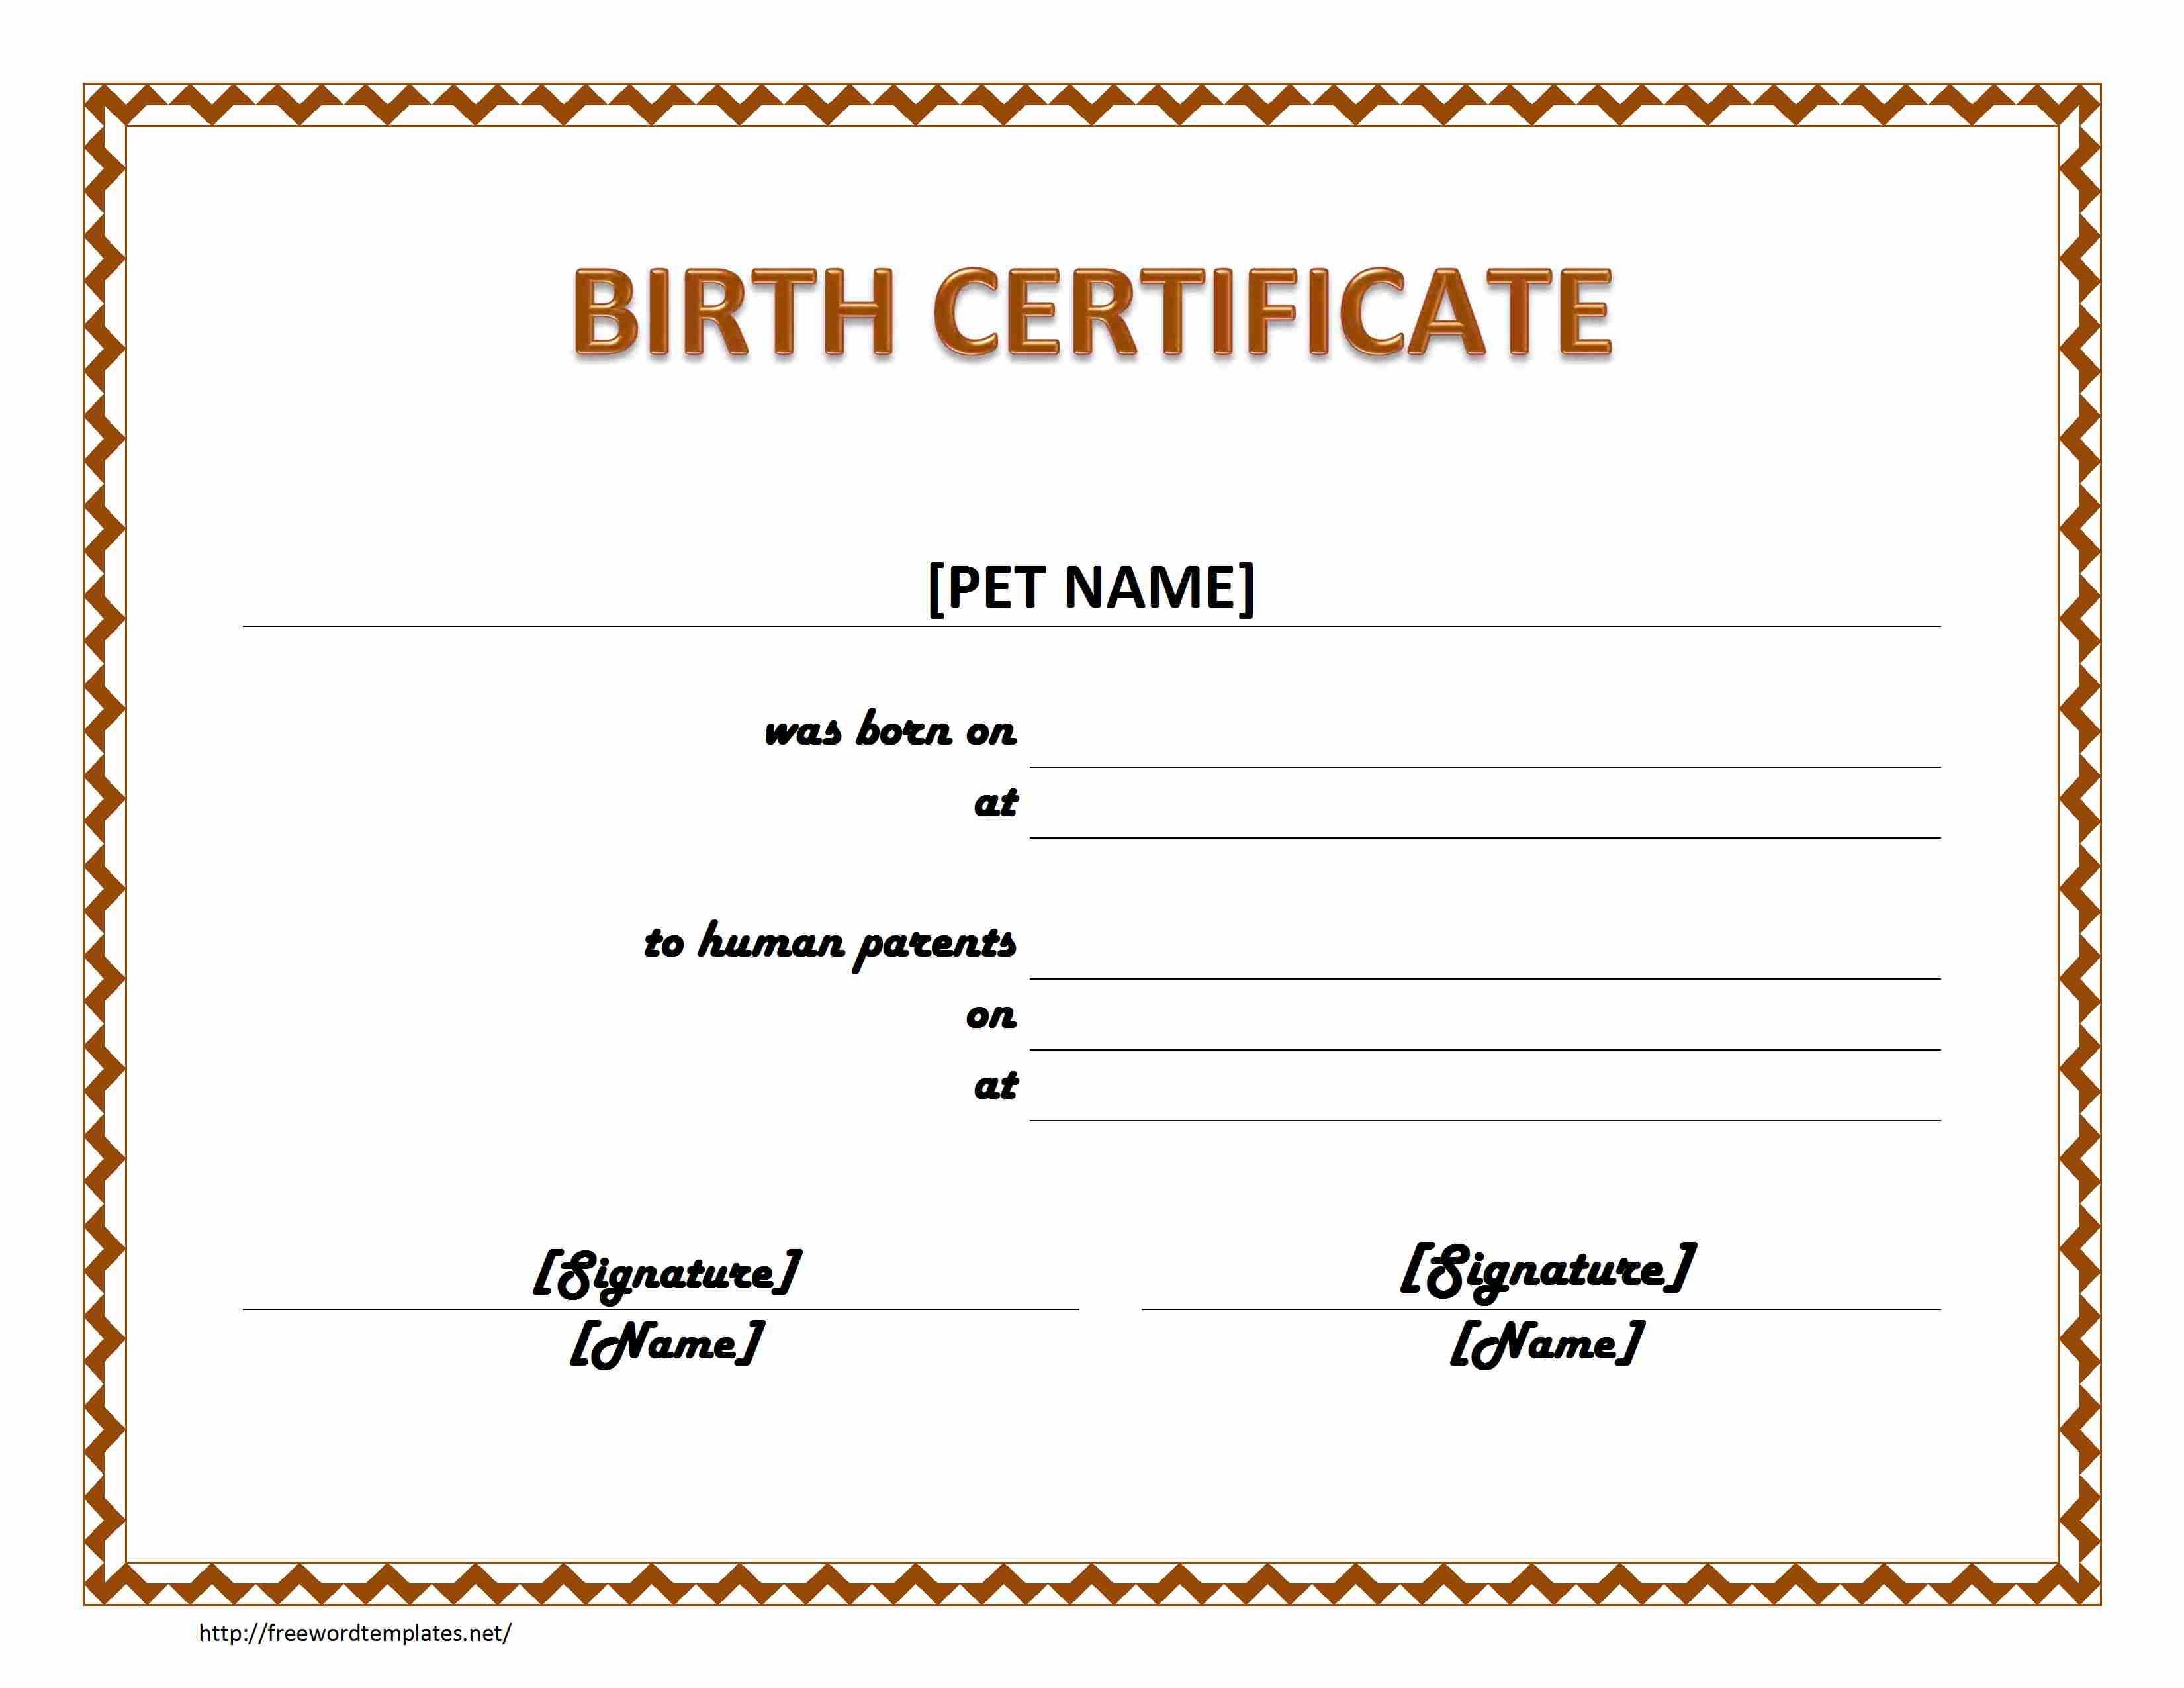 Pet Birth Certificate Maker | Pet Birth Certificate For Word Throughout Birth Certificate Templates For Word